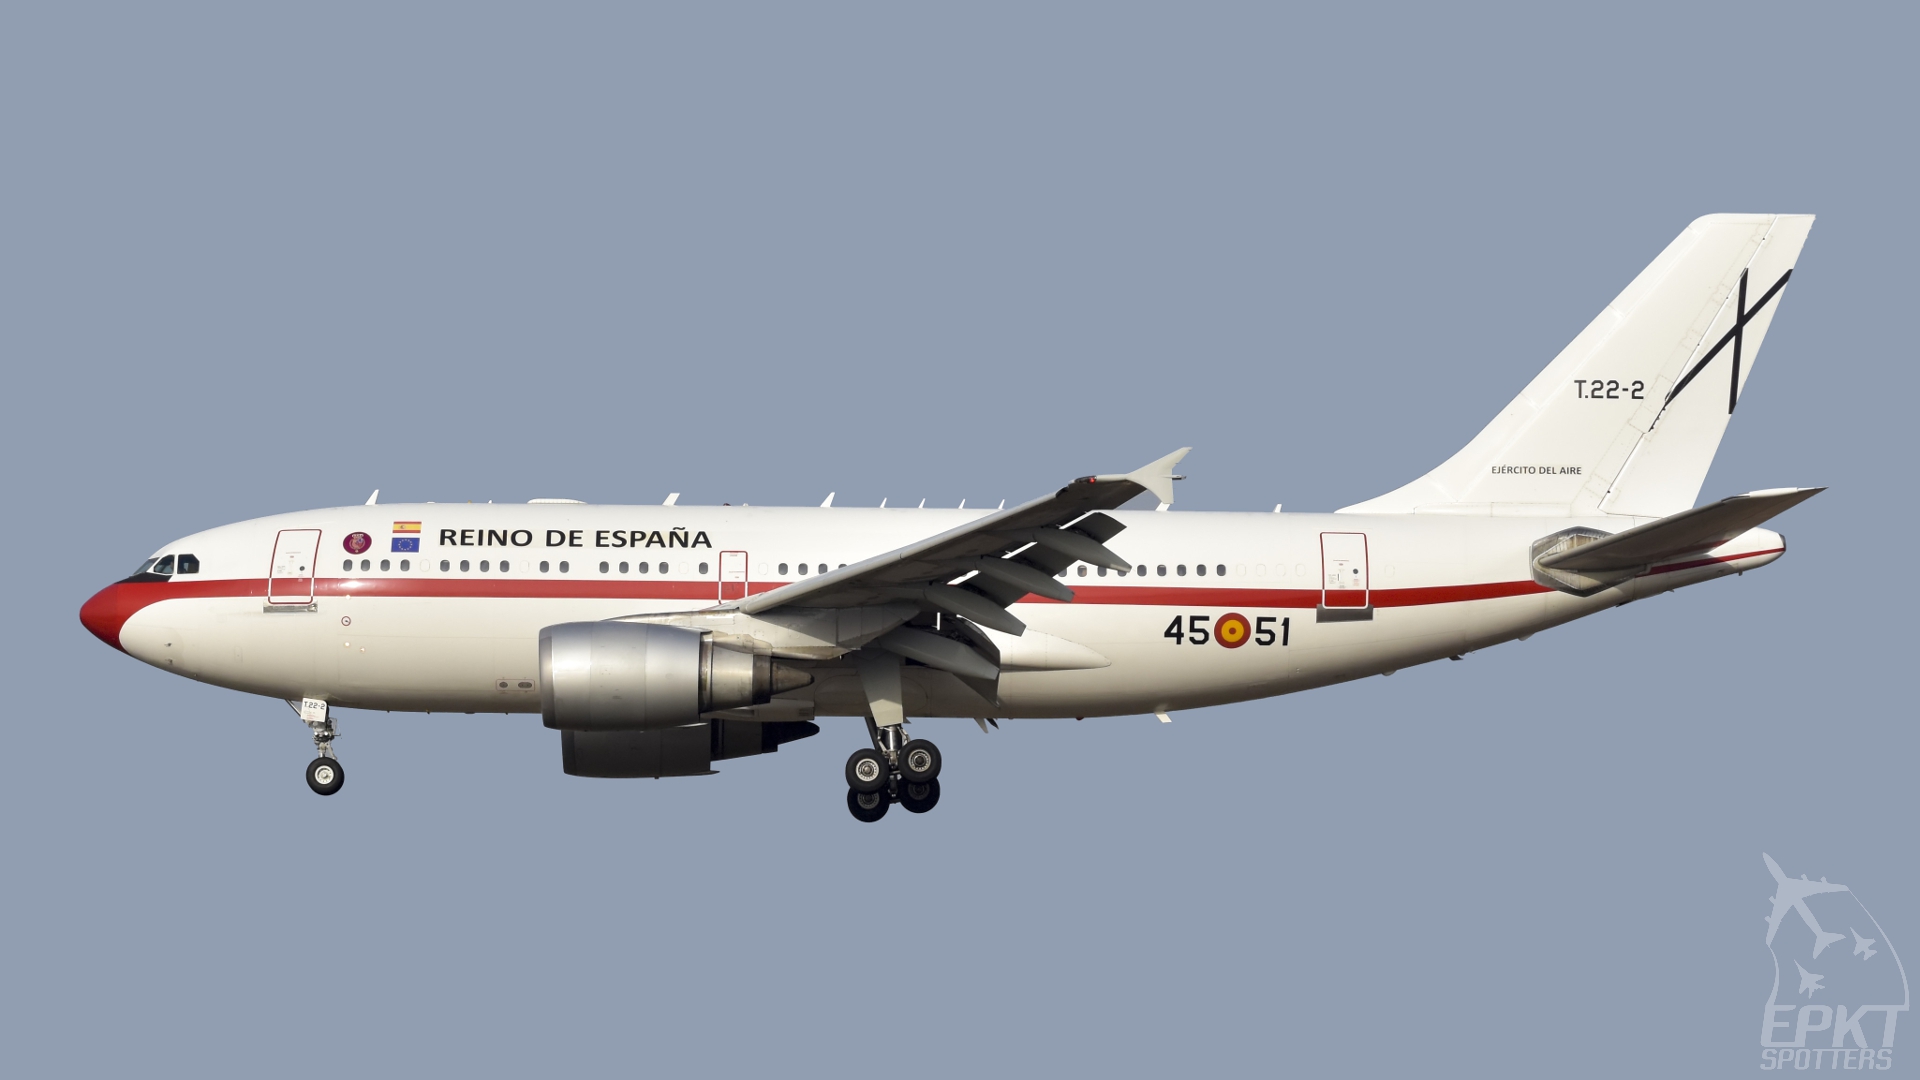 T.22-2 - Airbus A310 -304 (Spain - Air Force) / Pyrzowice - Katowice Poland [EPKT/KTW]